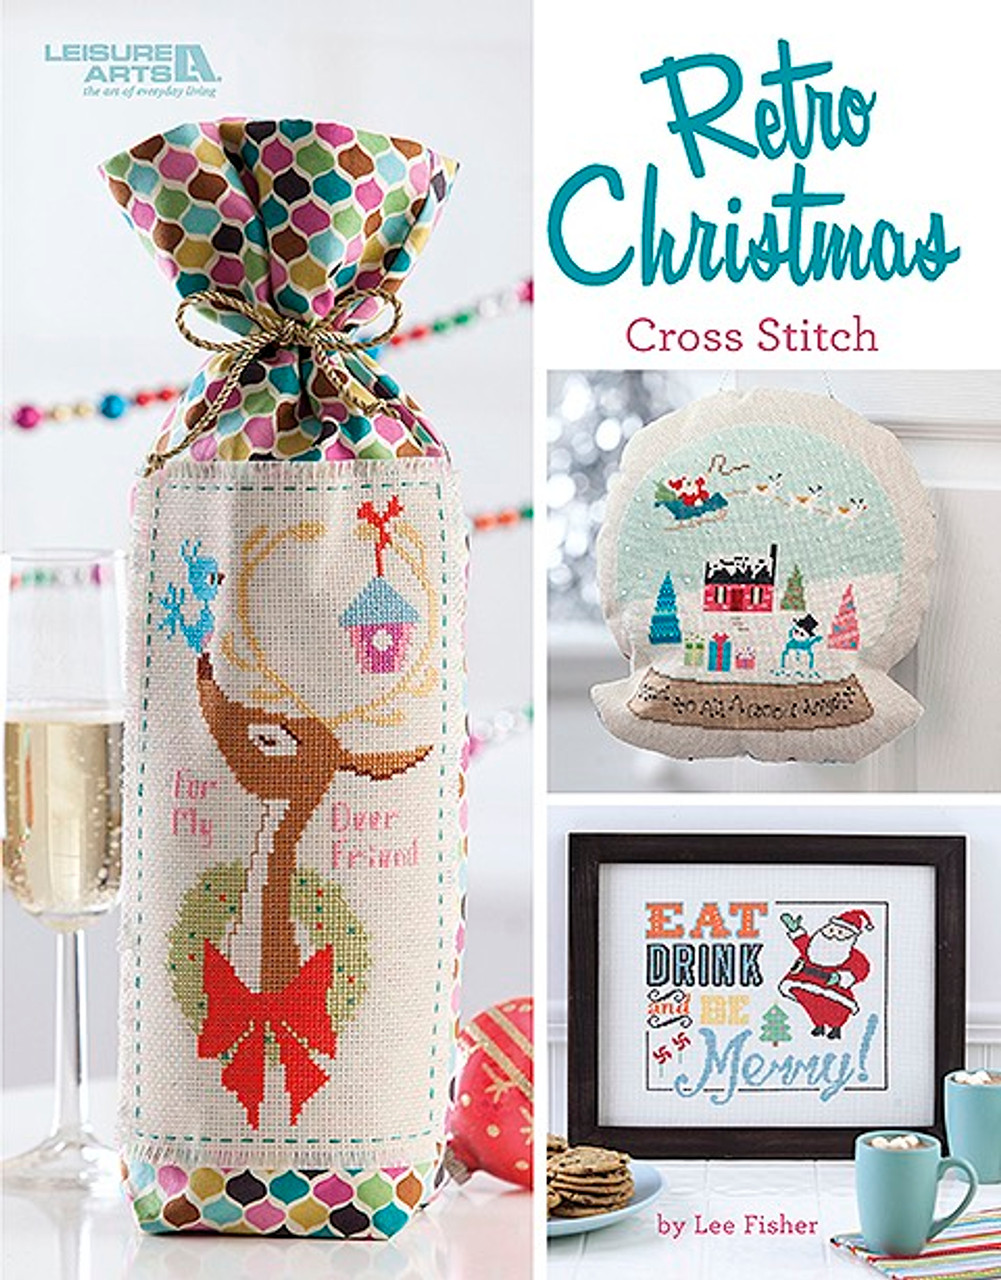 Leisure Arts Cross Stitch Holiday Ornaments Galor Cross Stitch Book- Cross  stitch pattern kits From snowmen to elves to woodland creatures, 98 Christmas  cross stitch ornaments to design. 